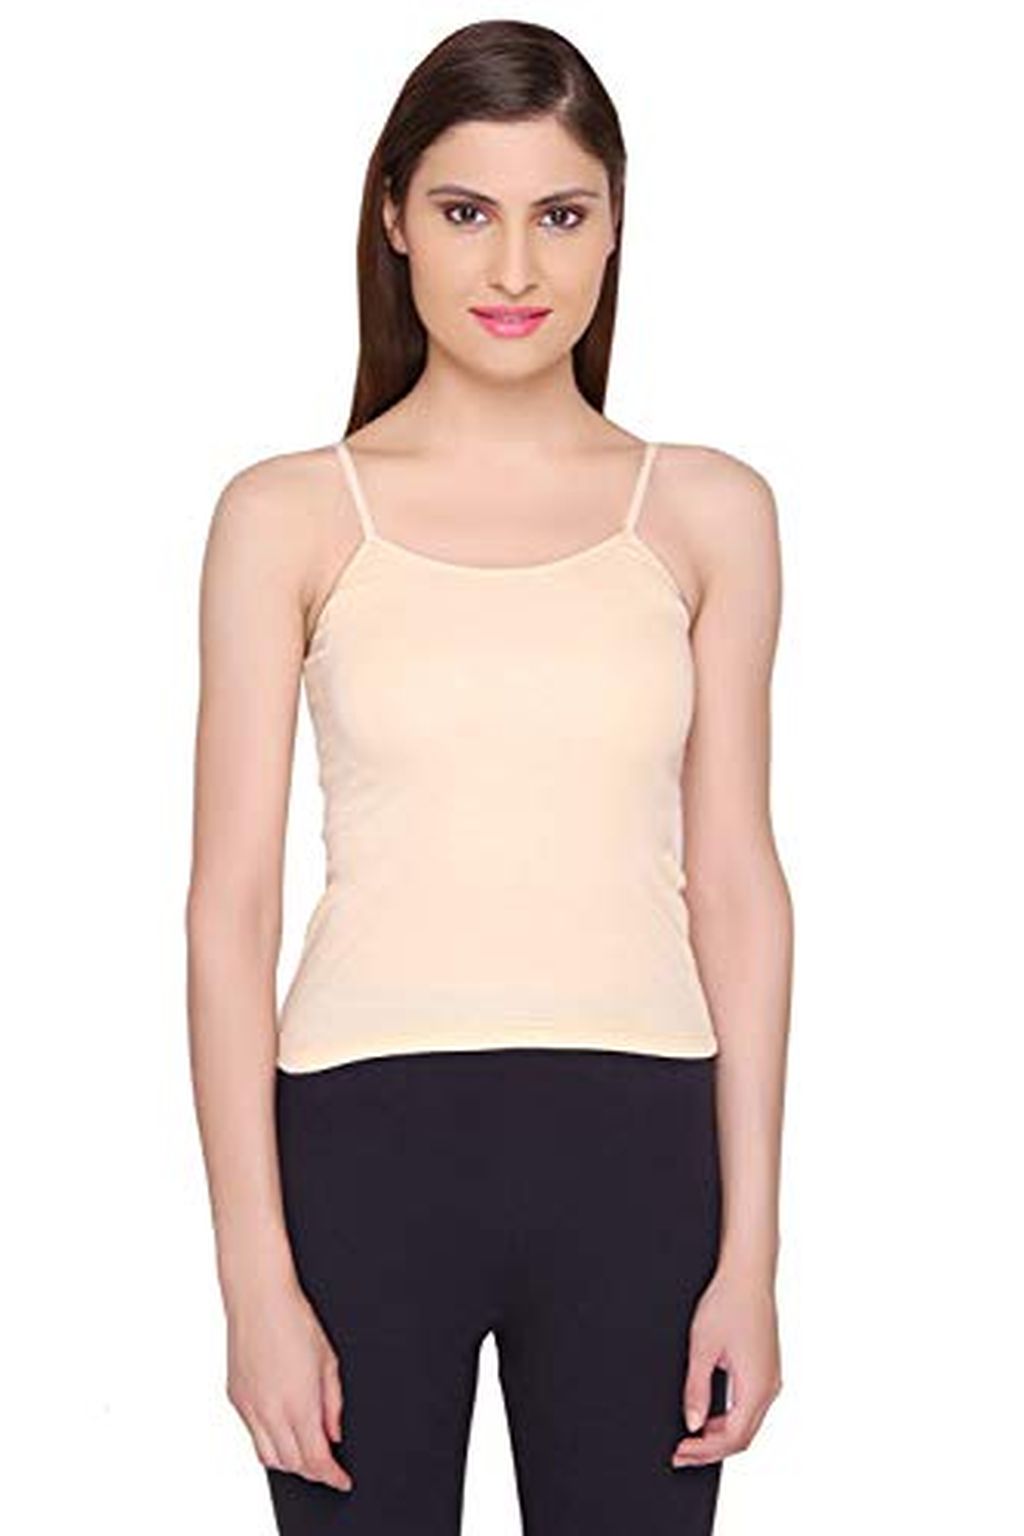 Nude Skin Color Slips for Women - Camsiole for Women - Waist Length Slips -  Soft Cotton Material Slips for Ladies